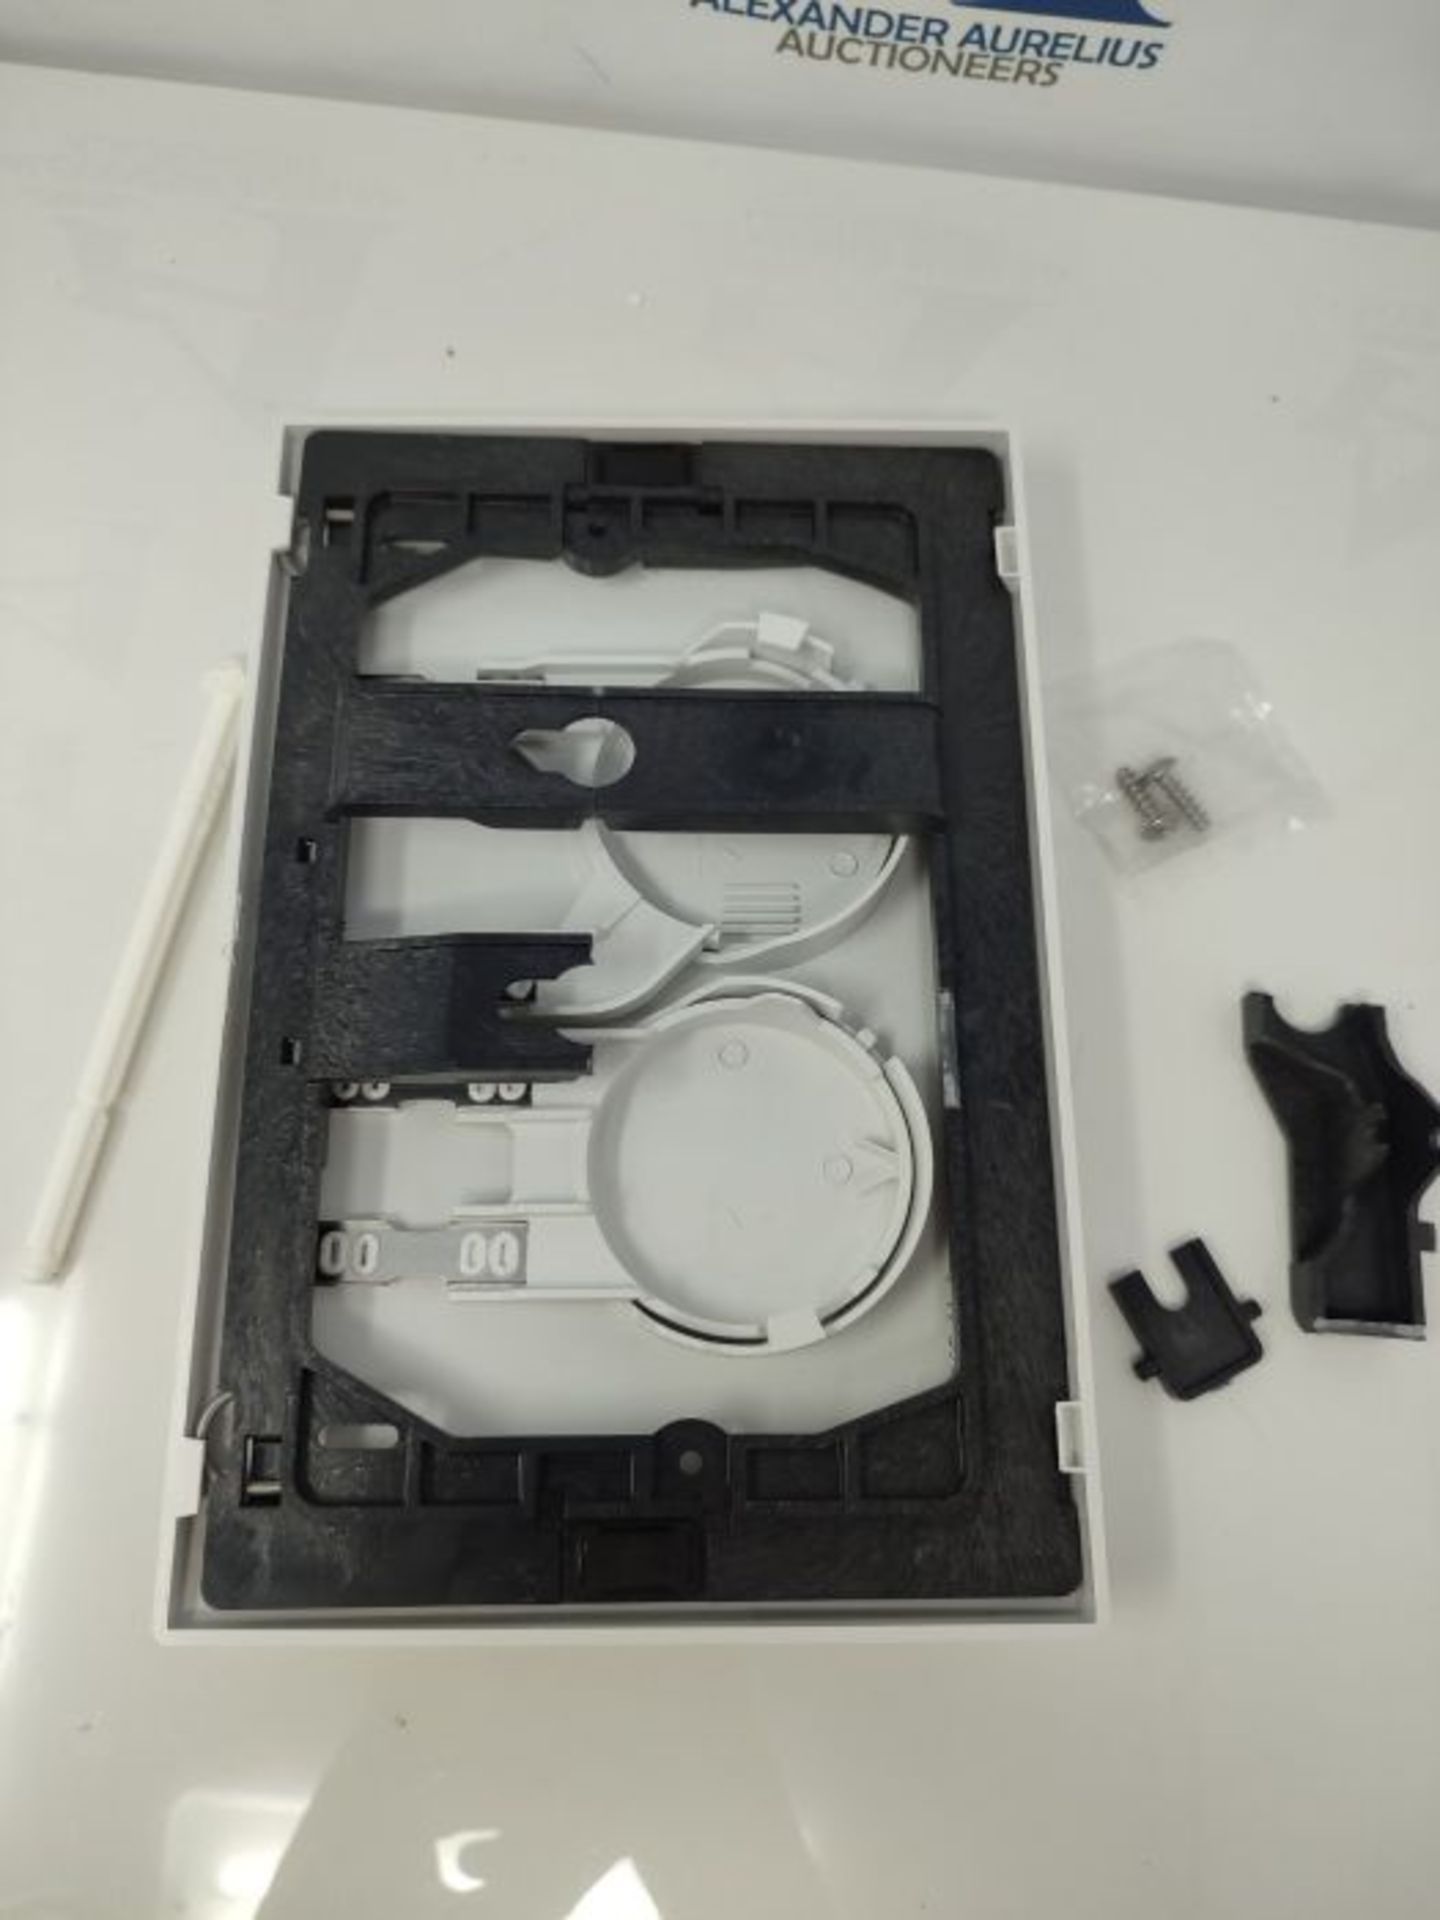 Geberit K11752 Delta 21 115.125.111 Actuator, Inspection Plate White, 245 x 165 x 14 m - Image 3 of 3